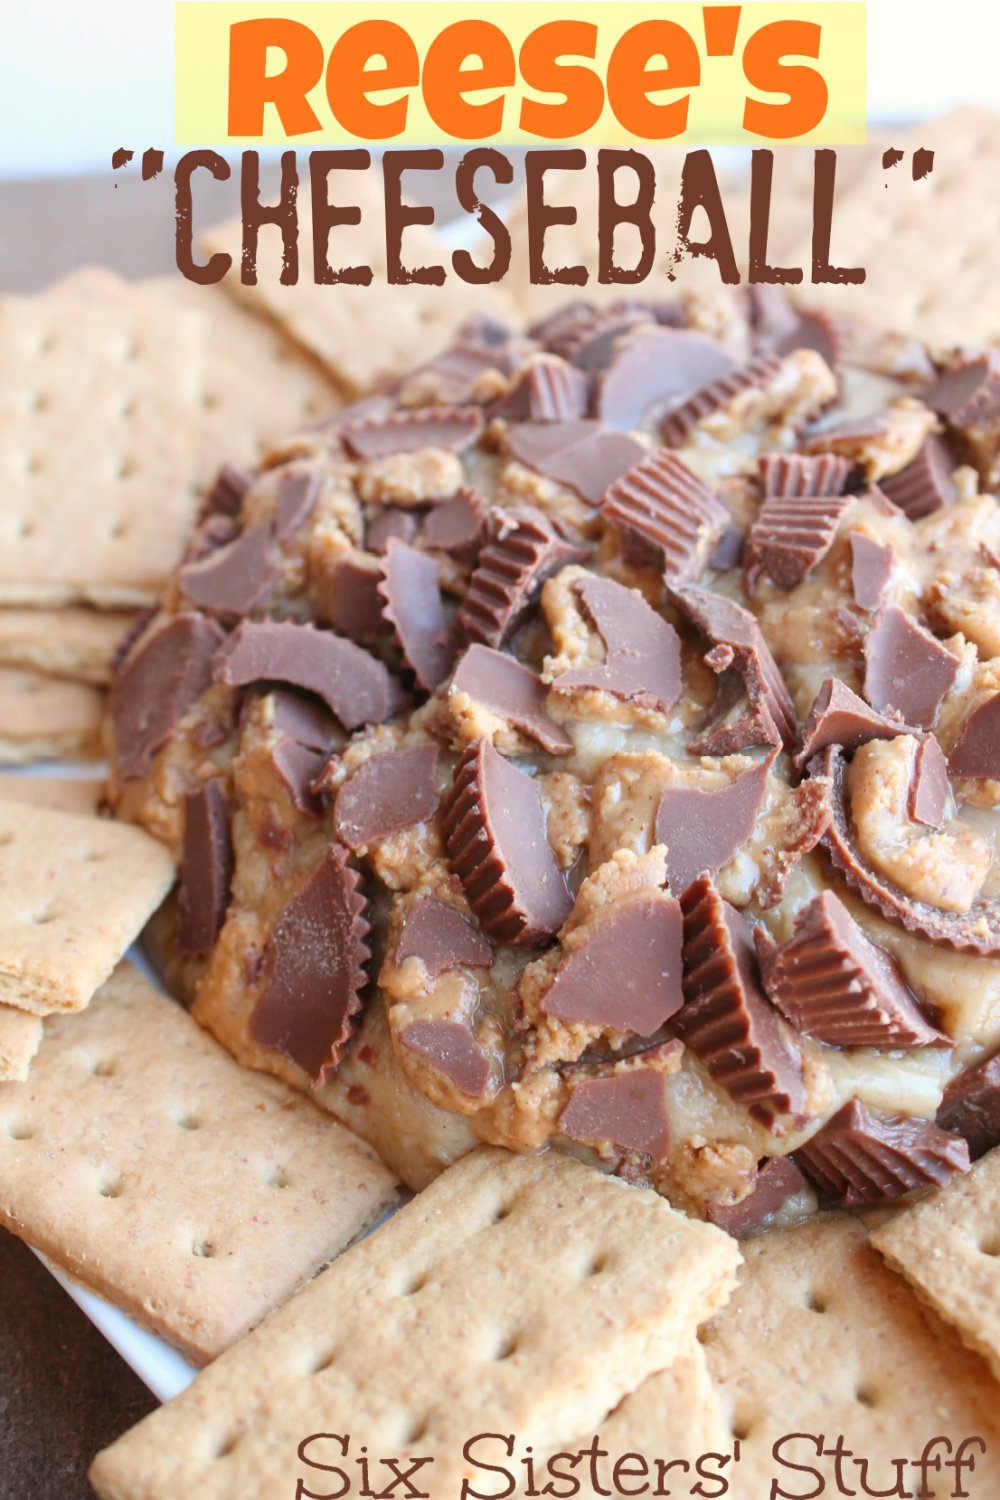 Reese’s Peanut Butter Cheese Ball Recipe